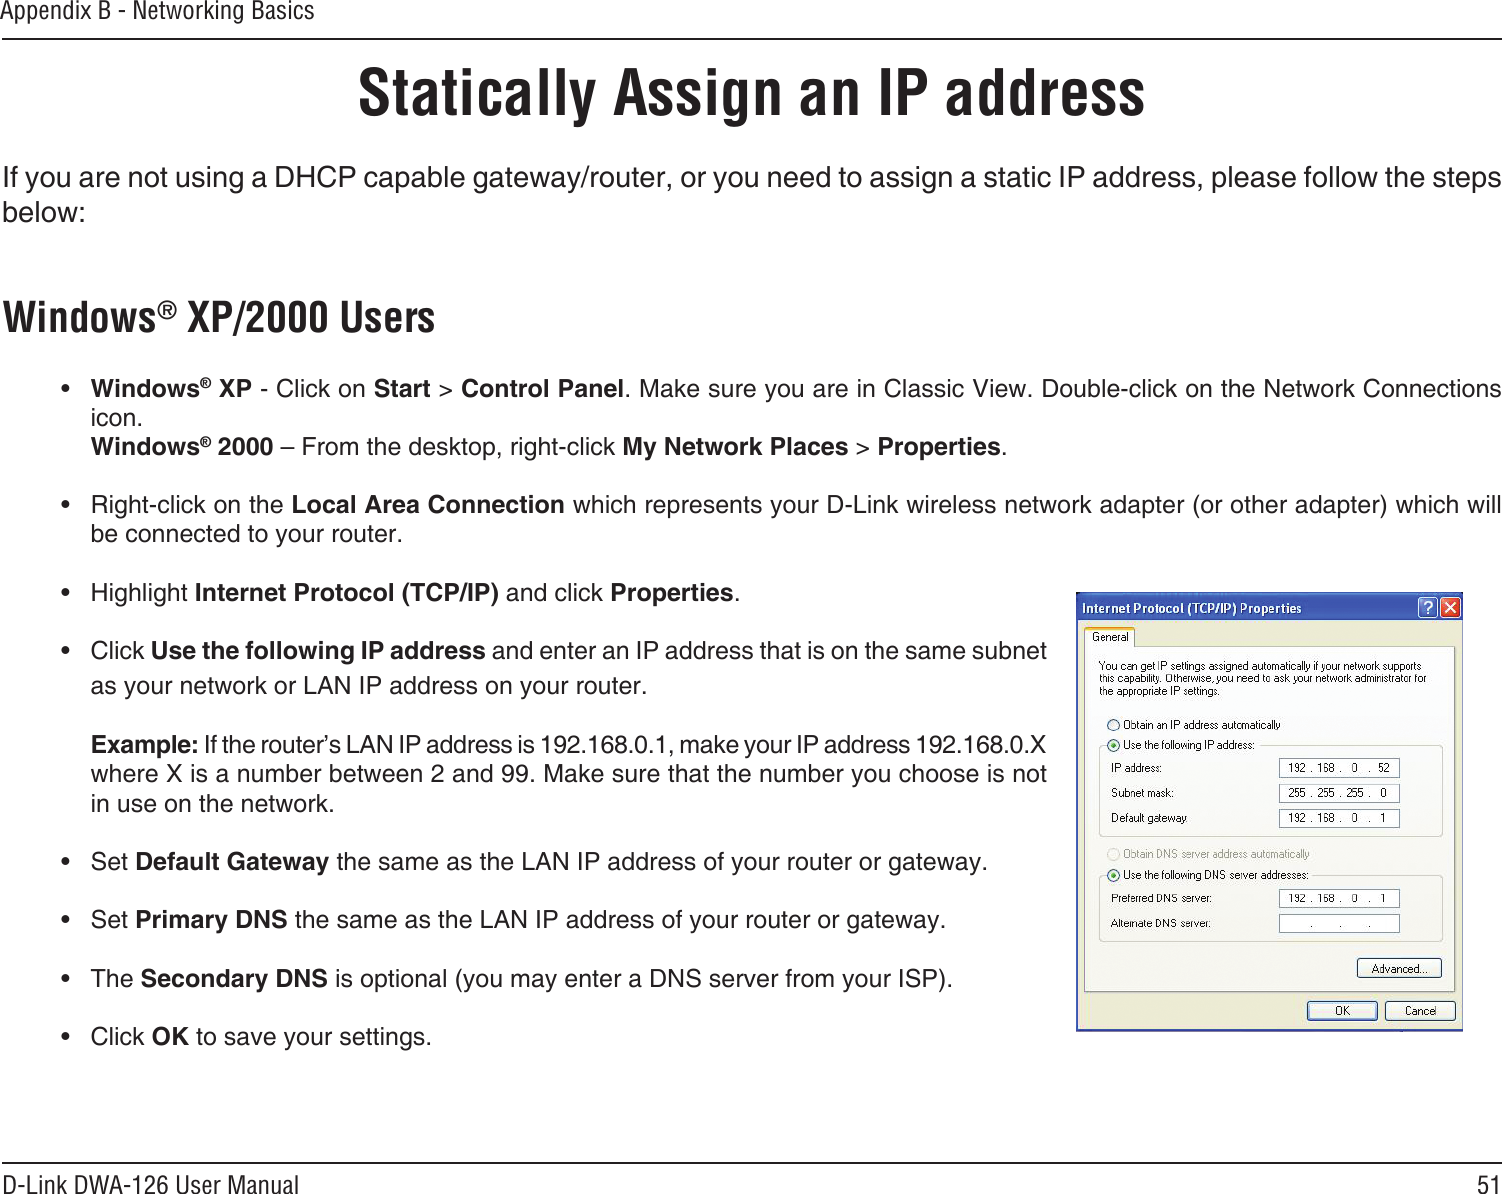 51D-Link DWA-126 User ManualAppendix B - Networking BasicsStatically Assign an IP addressIf you are not using a DHCP capable gateway/router, or you need to assign a static IP address, please follow the steps below:Windows® XP/2000 Users•  Windows® XP - Click on Start &gt; Control Panel. Make sure you are in Classic View. Double-click on the Network Connections icon. Windows® 2000 – From the desktop, right-click My Network Places &gt; Properties.•  Right-click on the Local Area Connection which represents your D-Link wireless network adapter (or other adapter) which will be connected to your router.•  Highlight Internet Protocol (TCP/IP) and click Properties.•  Click Use the following IP address and enter an IP address that is on the same subnet as your network or LAN IP address on your router. Example: If the router’s LAN IP address is 192.168.0.1, make your IP address 192.168.0.X where X is a number between 2 and 99. Make sure that the number you choose is not in use on the network. •  Set Default Gateway the same as the LAN IP address of your router or gateway.•  Set Primary DNS the same as the LAN IP address of your router or gateway. •  The Secondary DNS is optional (you may enter a DNS server from your ISP).•  Click OK to save your settings.